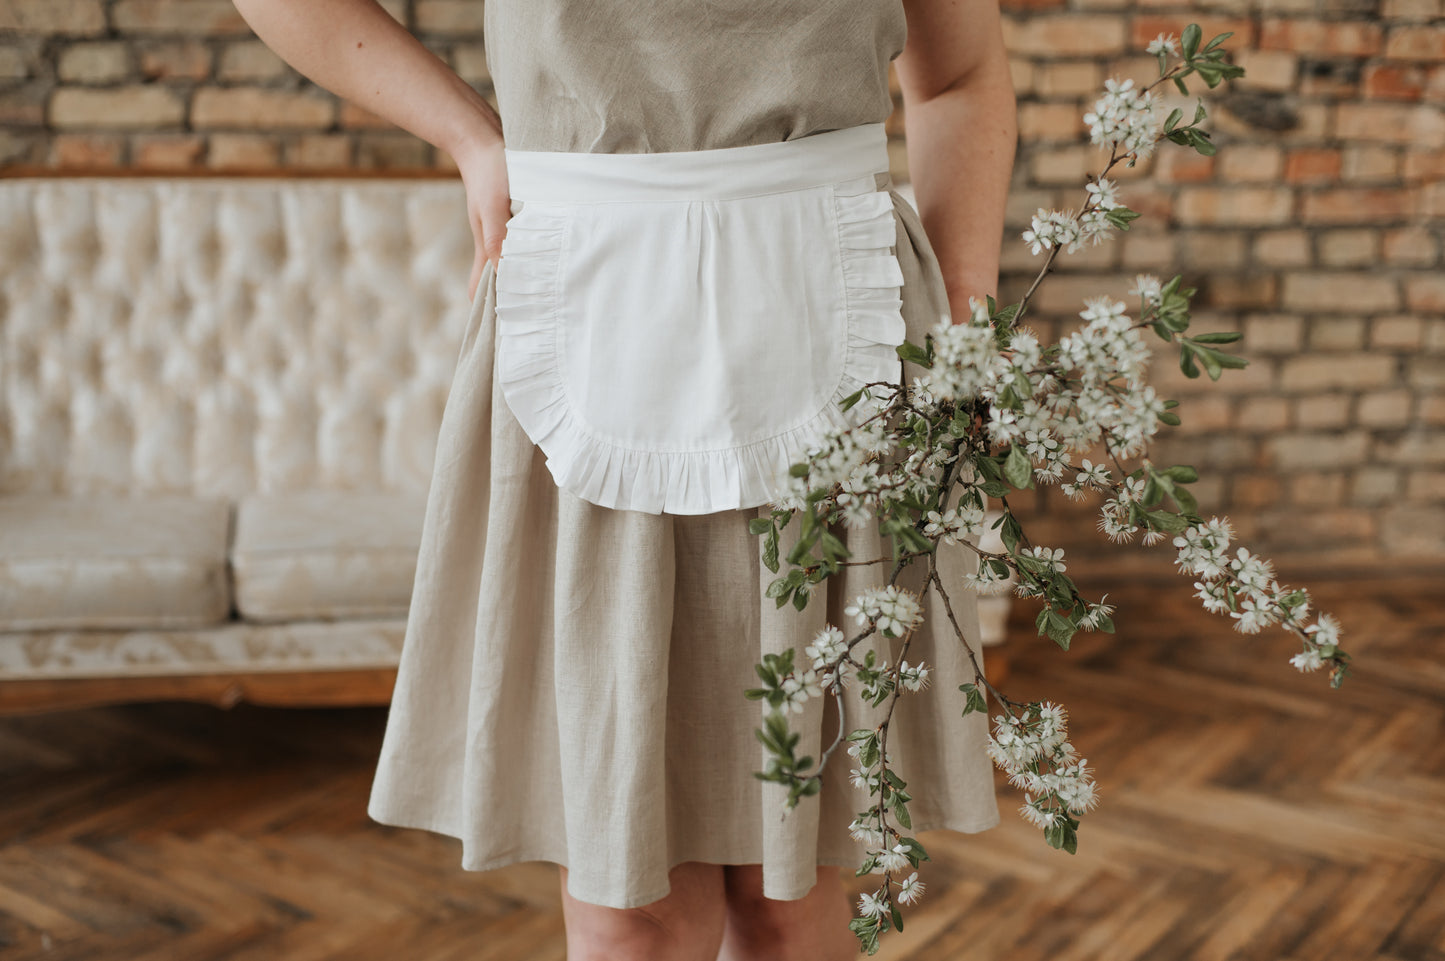 French Maid White Cotton Apron with Ruffles